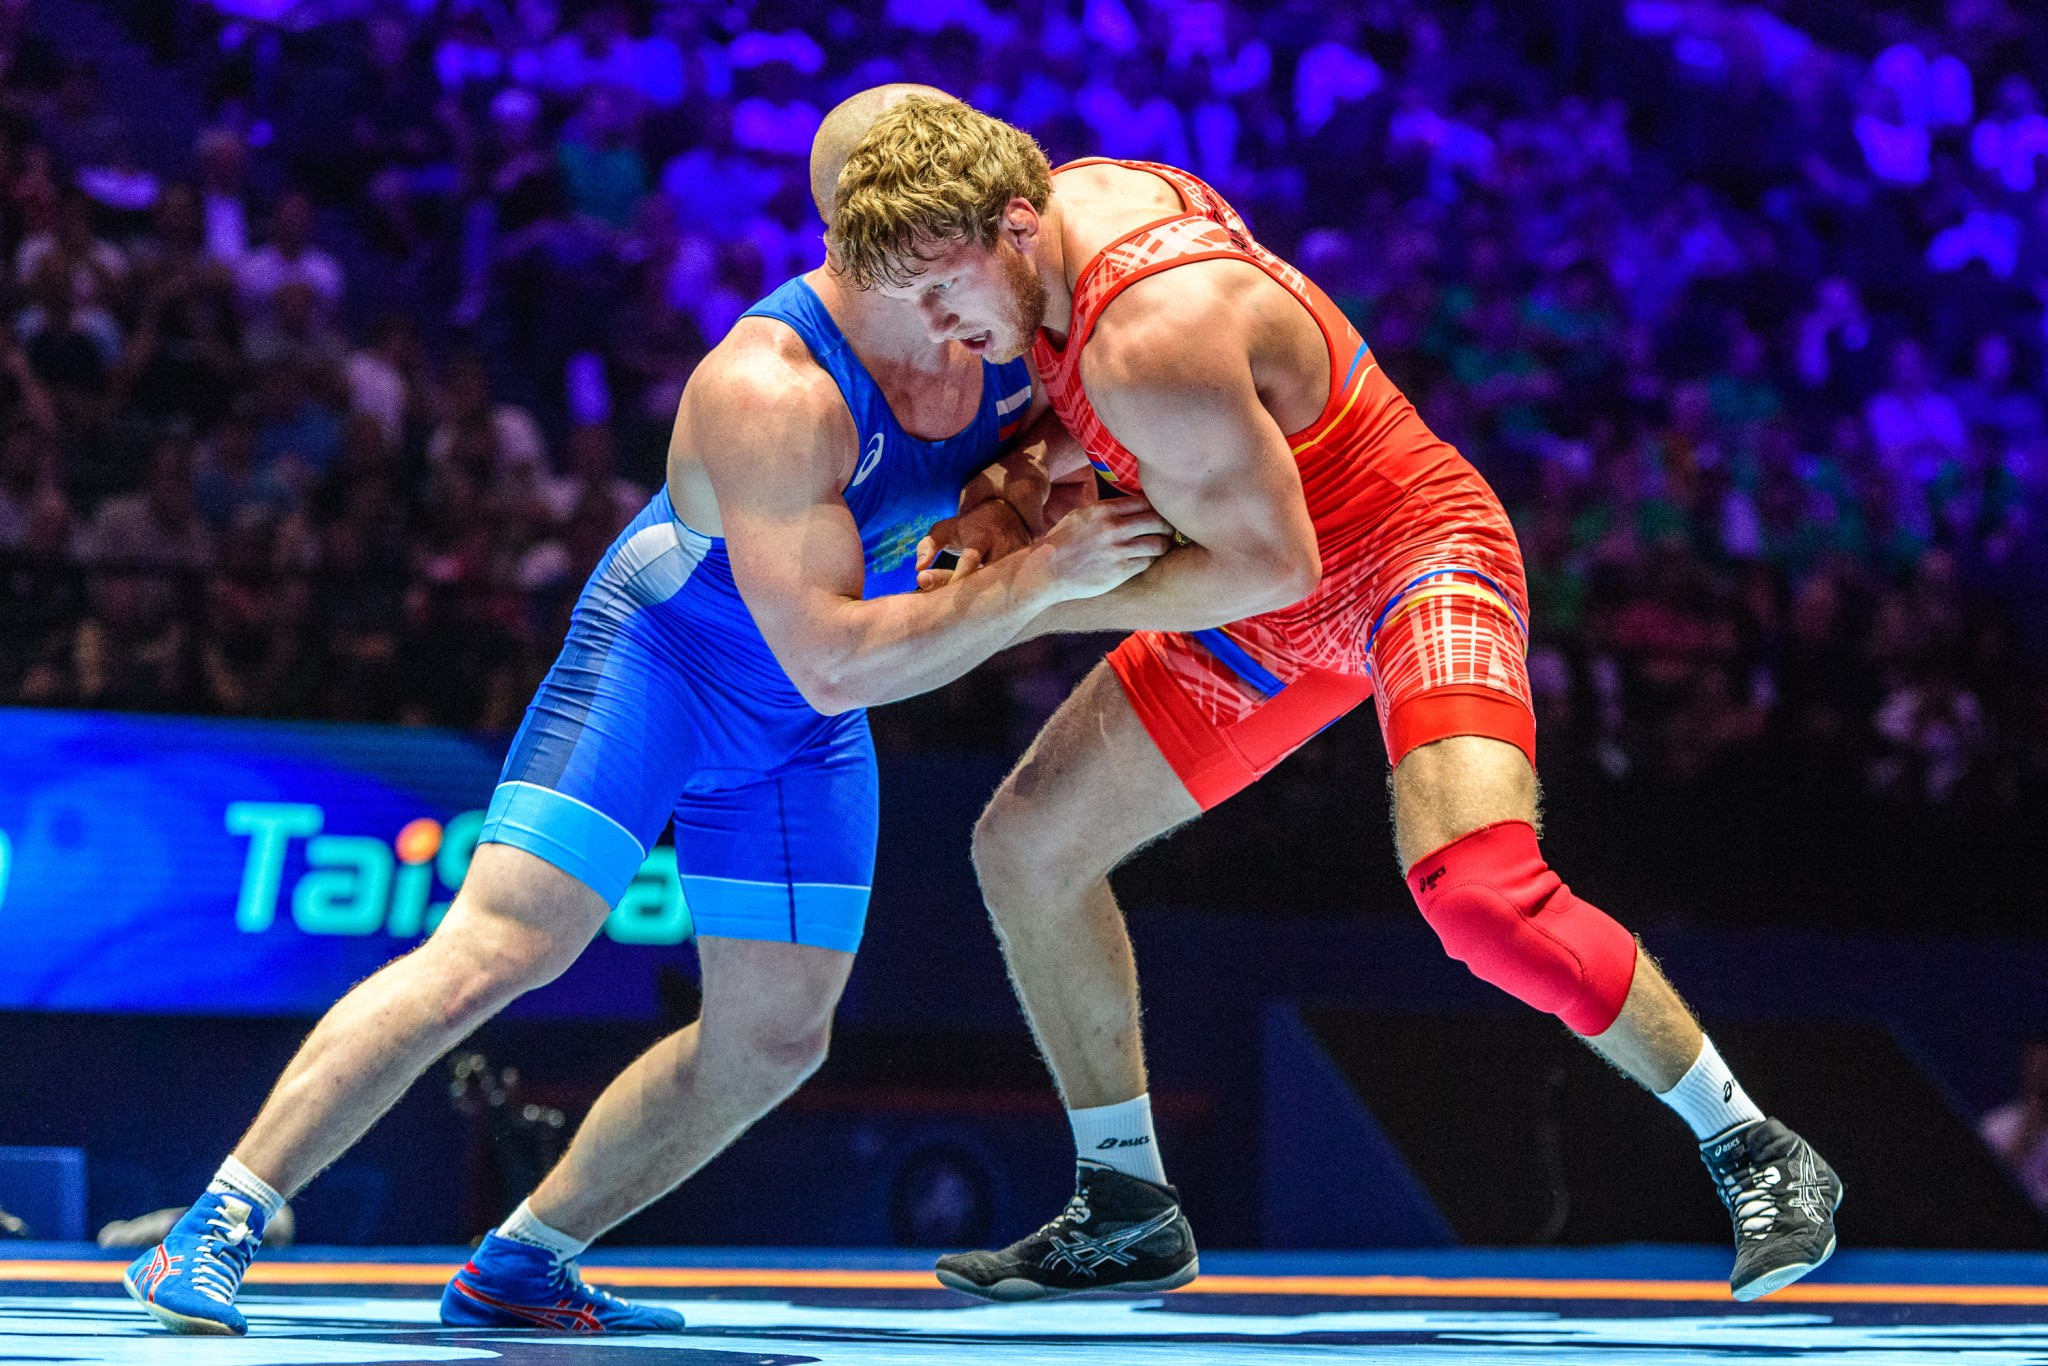 Aleksanyan and Stäbler shine on first day of competition at UWW